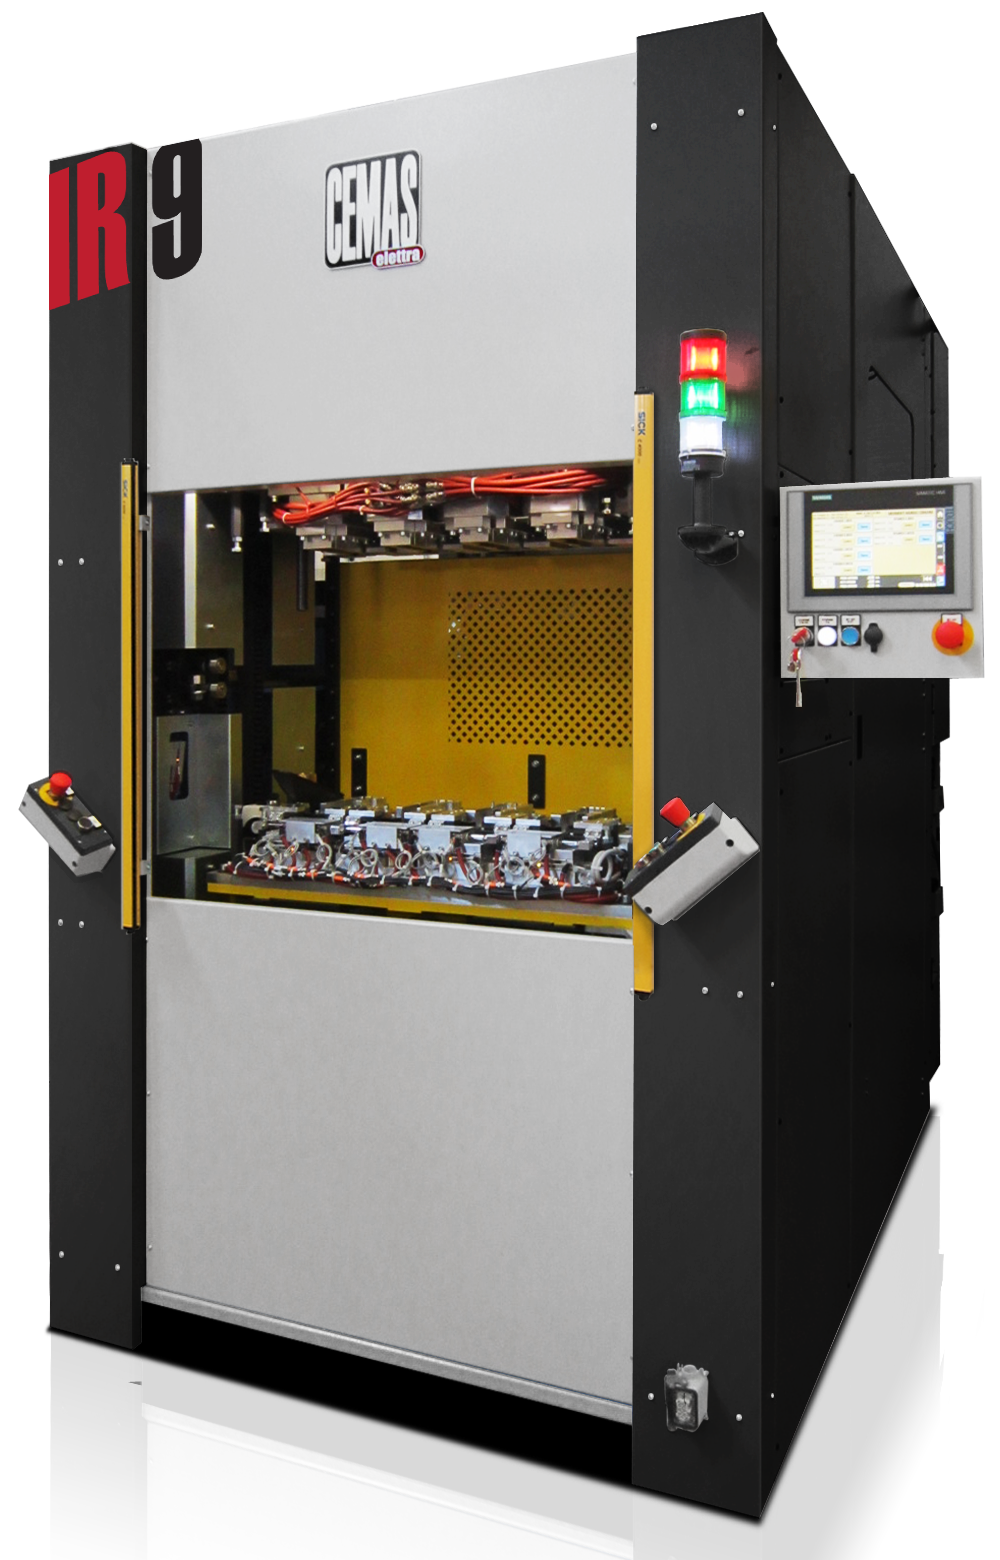 Manufacturers of High Performance Infrared Welding Machines